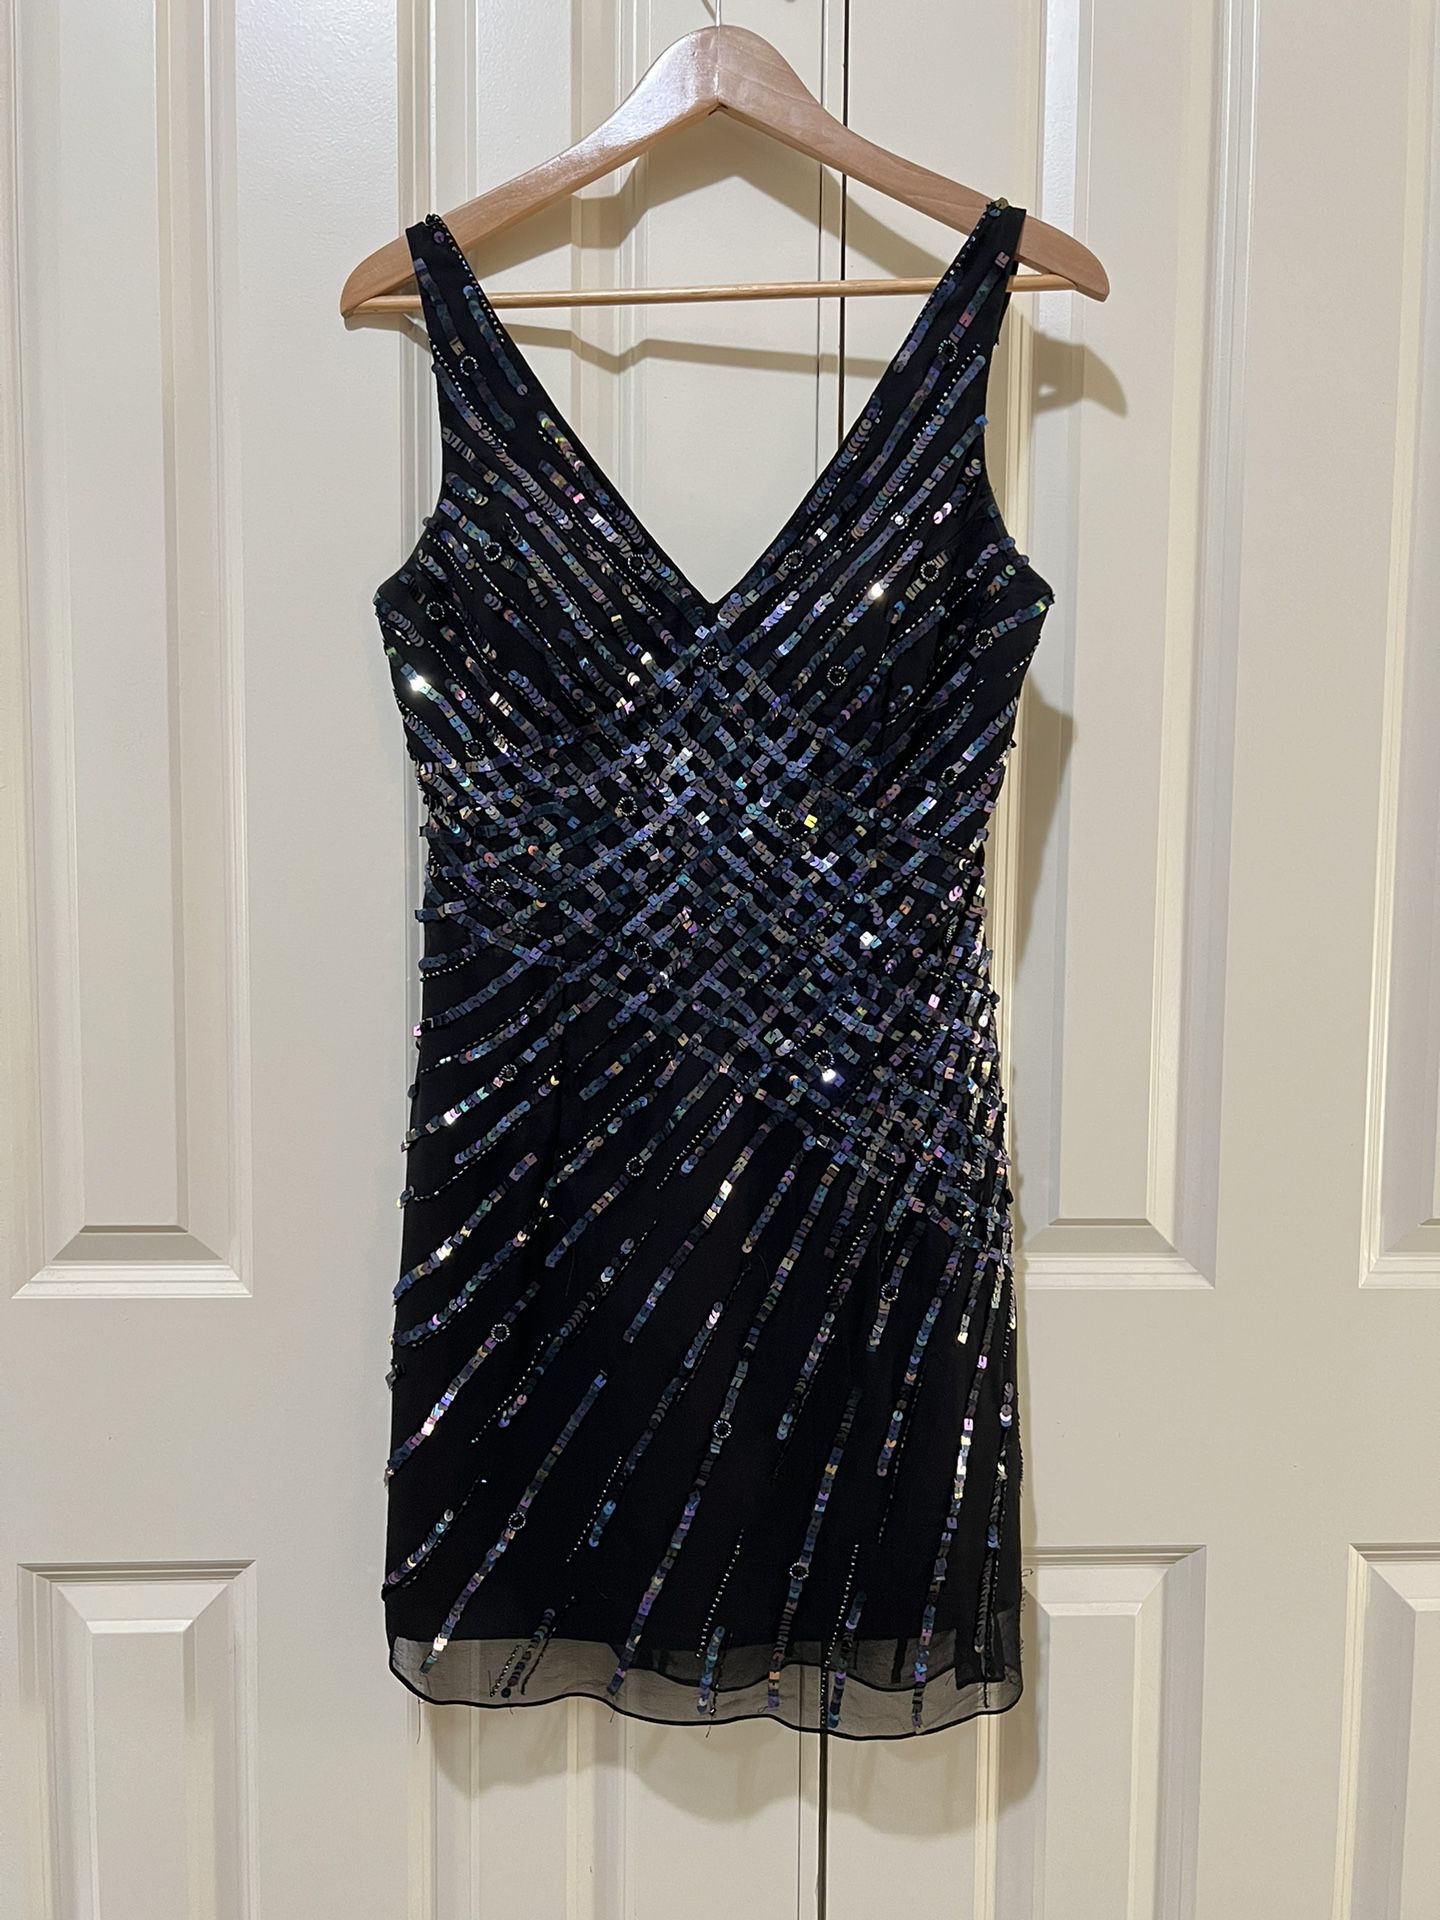 Sean Collection Sparkly Mini Cocktail Dress Size 10, Black w/iridescent sequins and beading